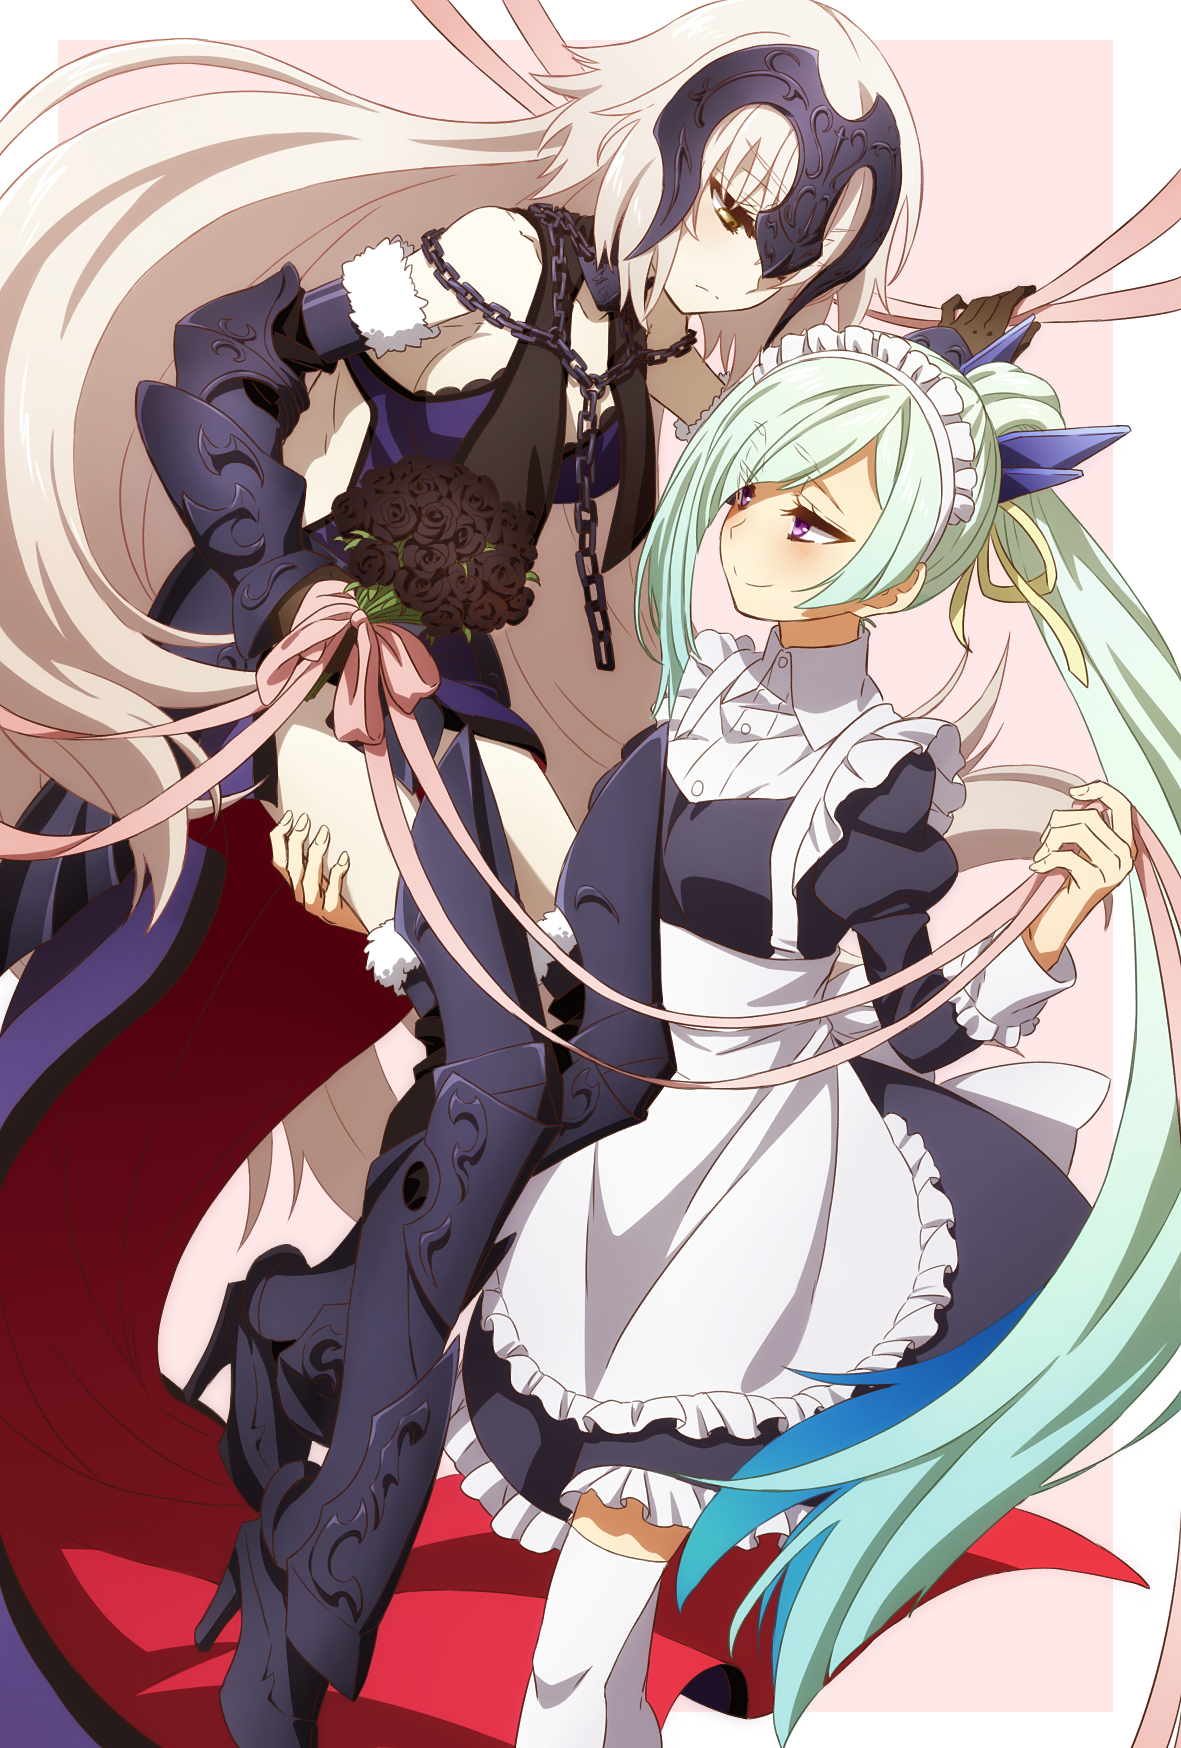 Anime 1181x1748 Fate/Grand Order Jeanne (Alter) (Fate/Grand Order) Brynhildr (Fate/Grand Order) Jeanne d'Arc (Fate) Fate series anime girls anime two women maid chains maid outfit green hair blonde